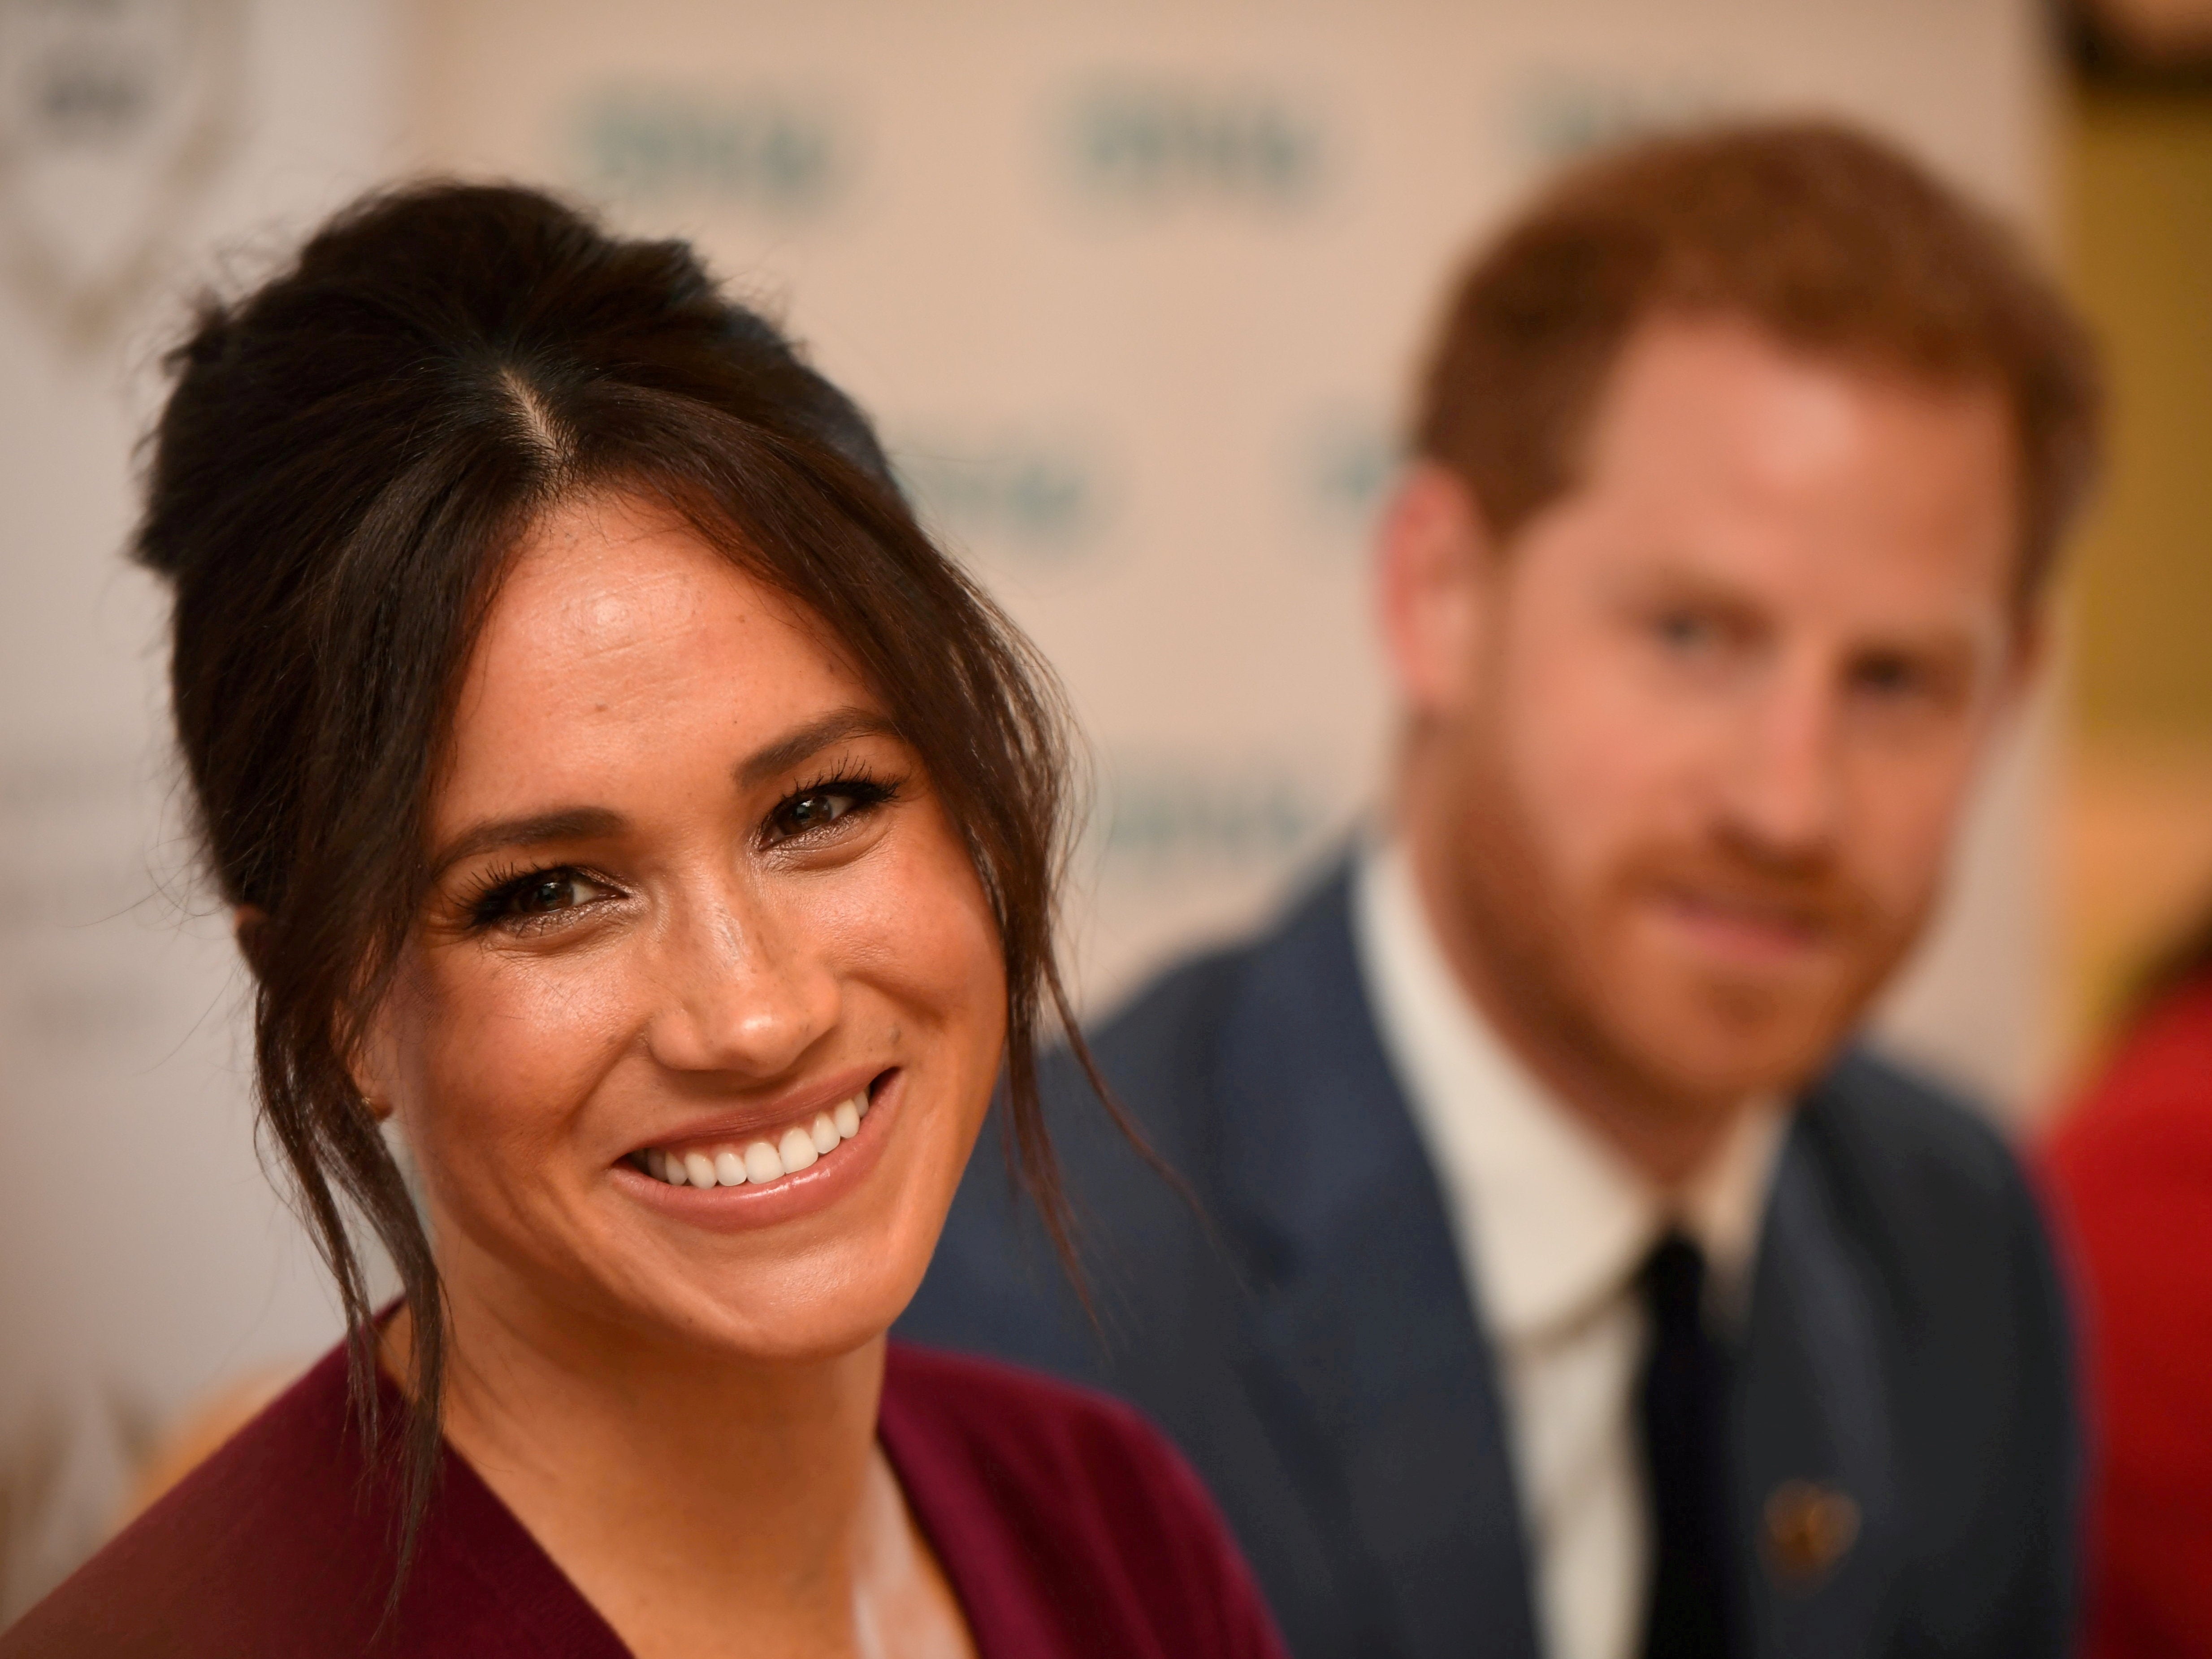 Meghan Markle, the Duchess of Sussex, sued the Mail on Sunday’s publisher over five articles that reproduced parts of a letter sent to her father Thomas Markle